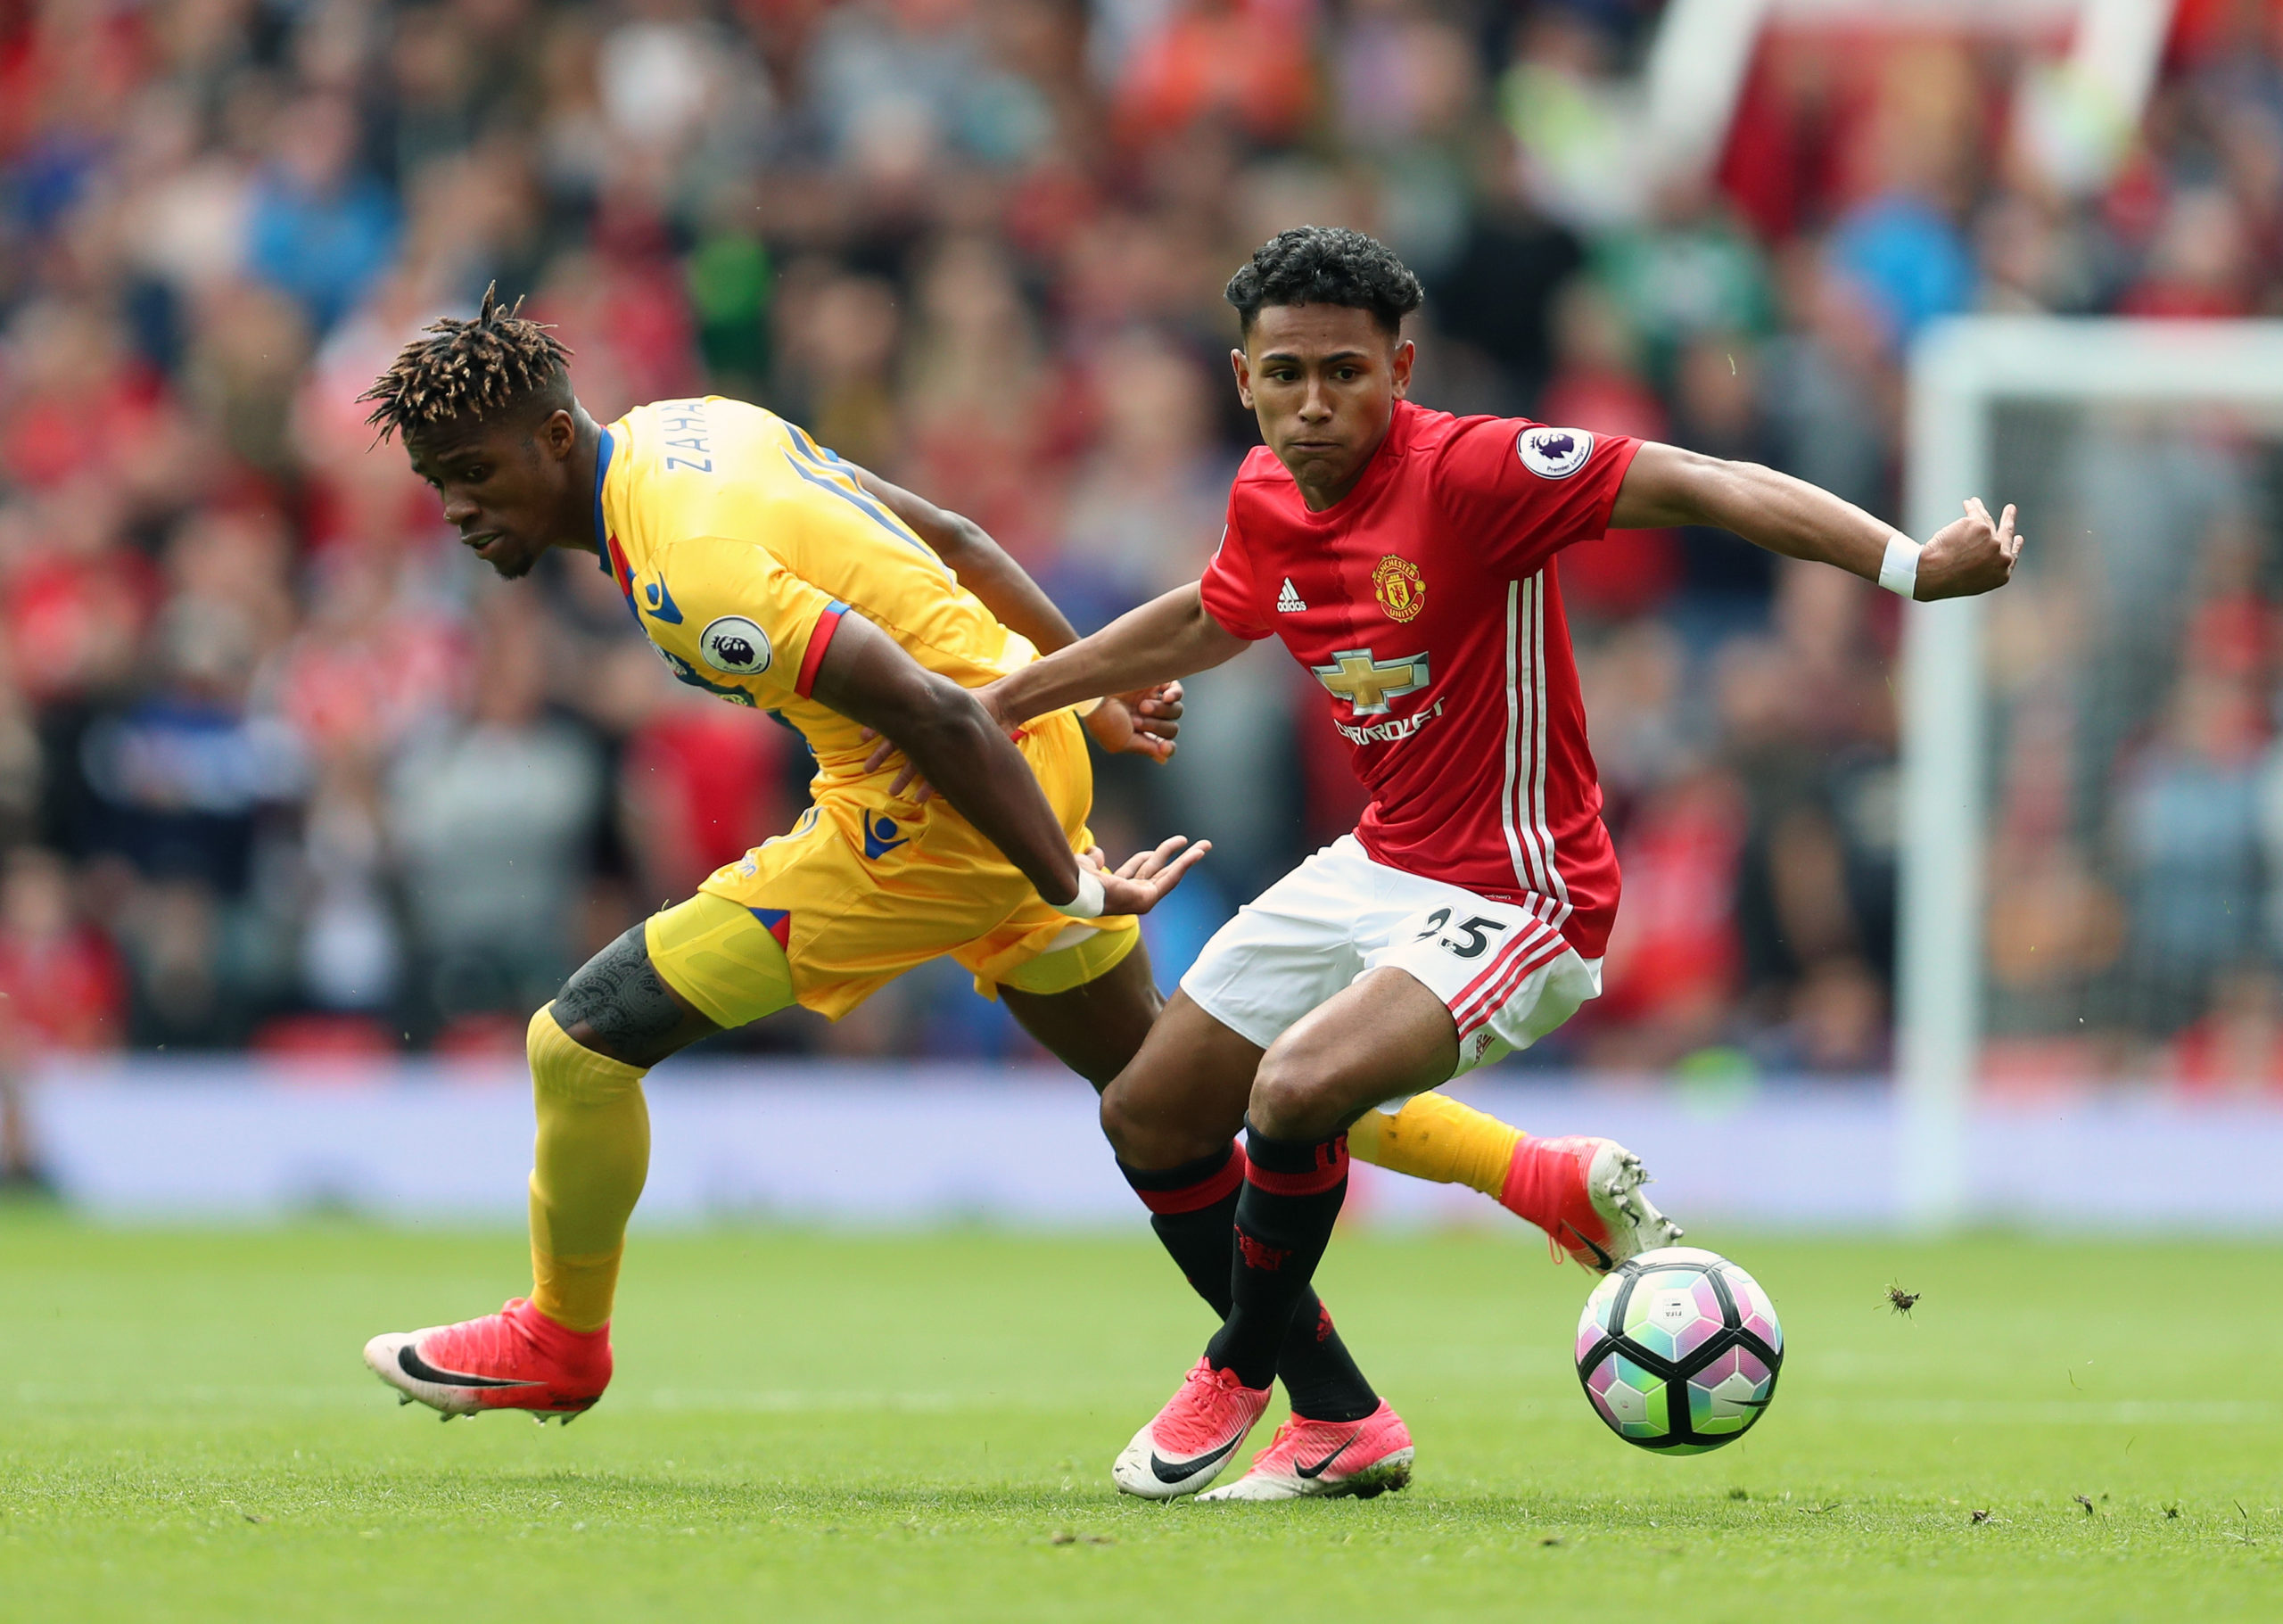 Former Manchester United talent Demetri Mitchell lands Hibernian move 18 month after Red Devils release